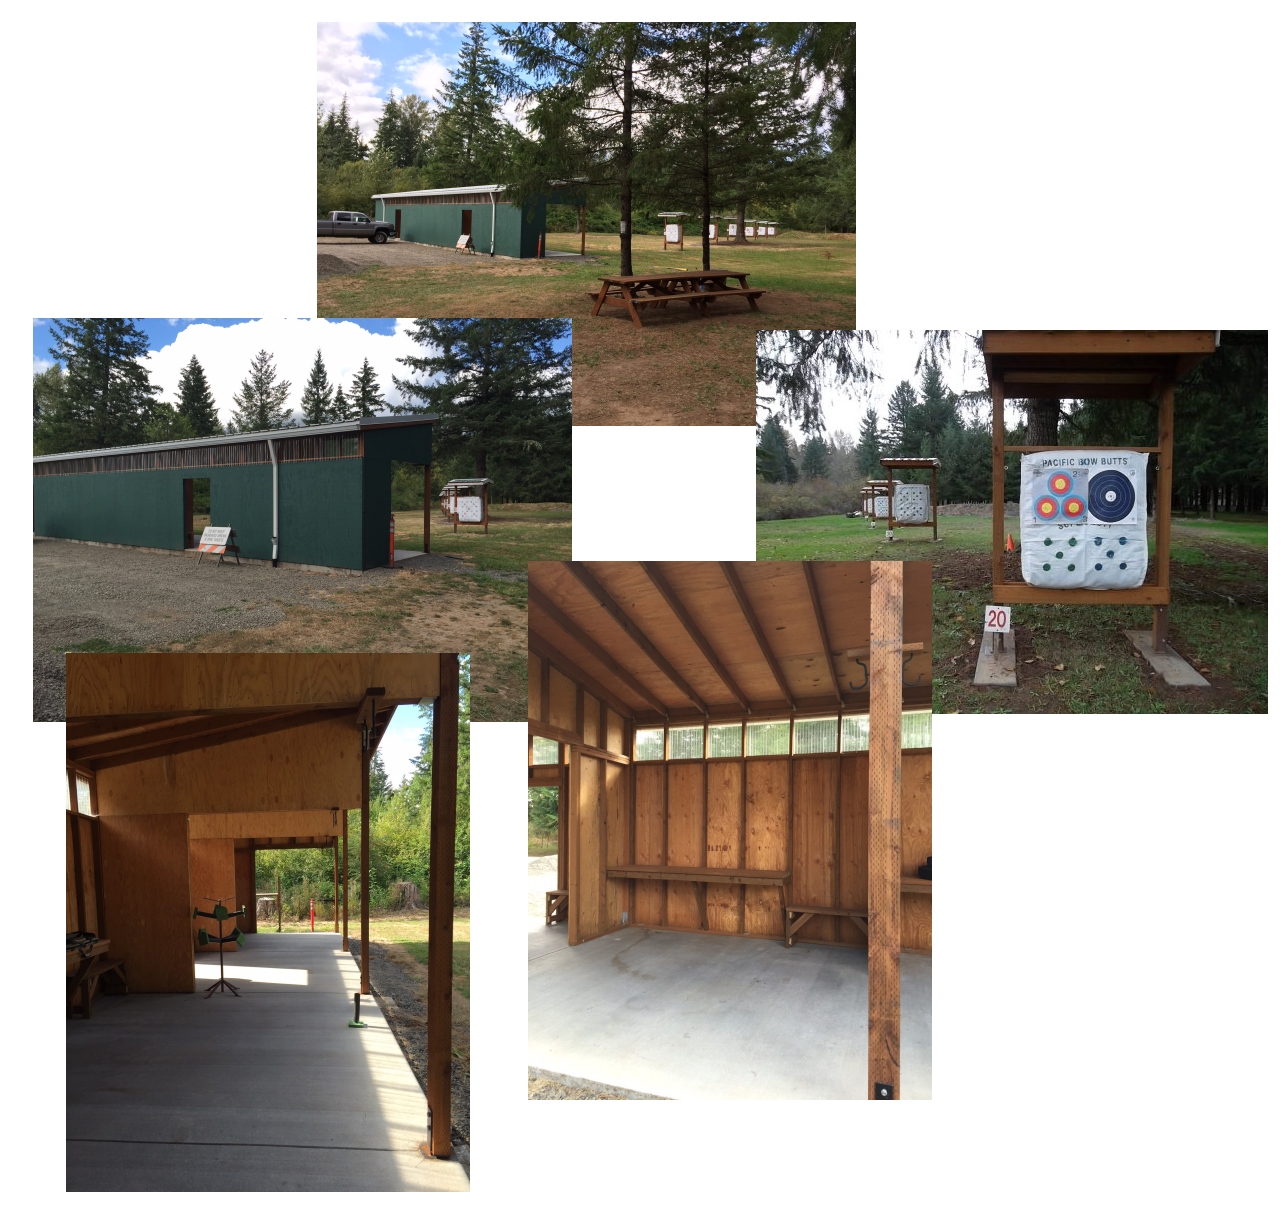 Image collage of the Douglas Ridge Rifle Club Archery Range. First image is of a picnic table with trees and a dark green covered shooting area. Clockwise next image is of a variety of targets used for archery. Next image is of the interior of the dark green covered shooting area. Next image is of the interior of the dark green covered shooting area from the side, showing trees nearby.